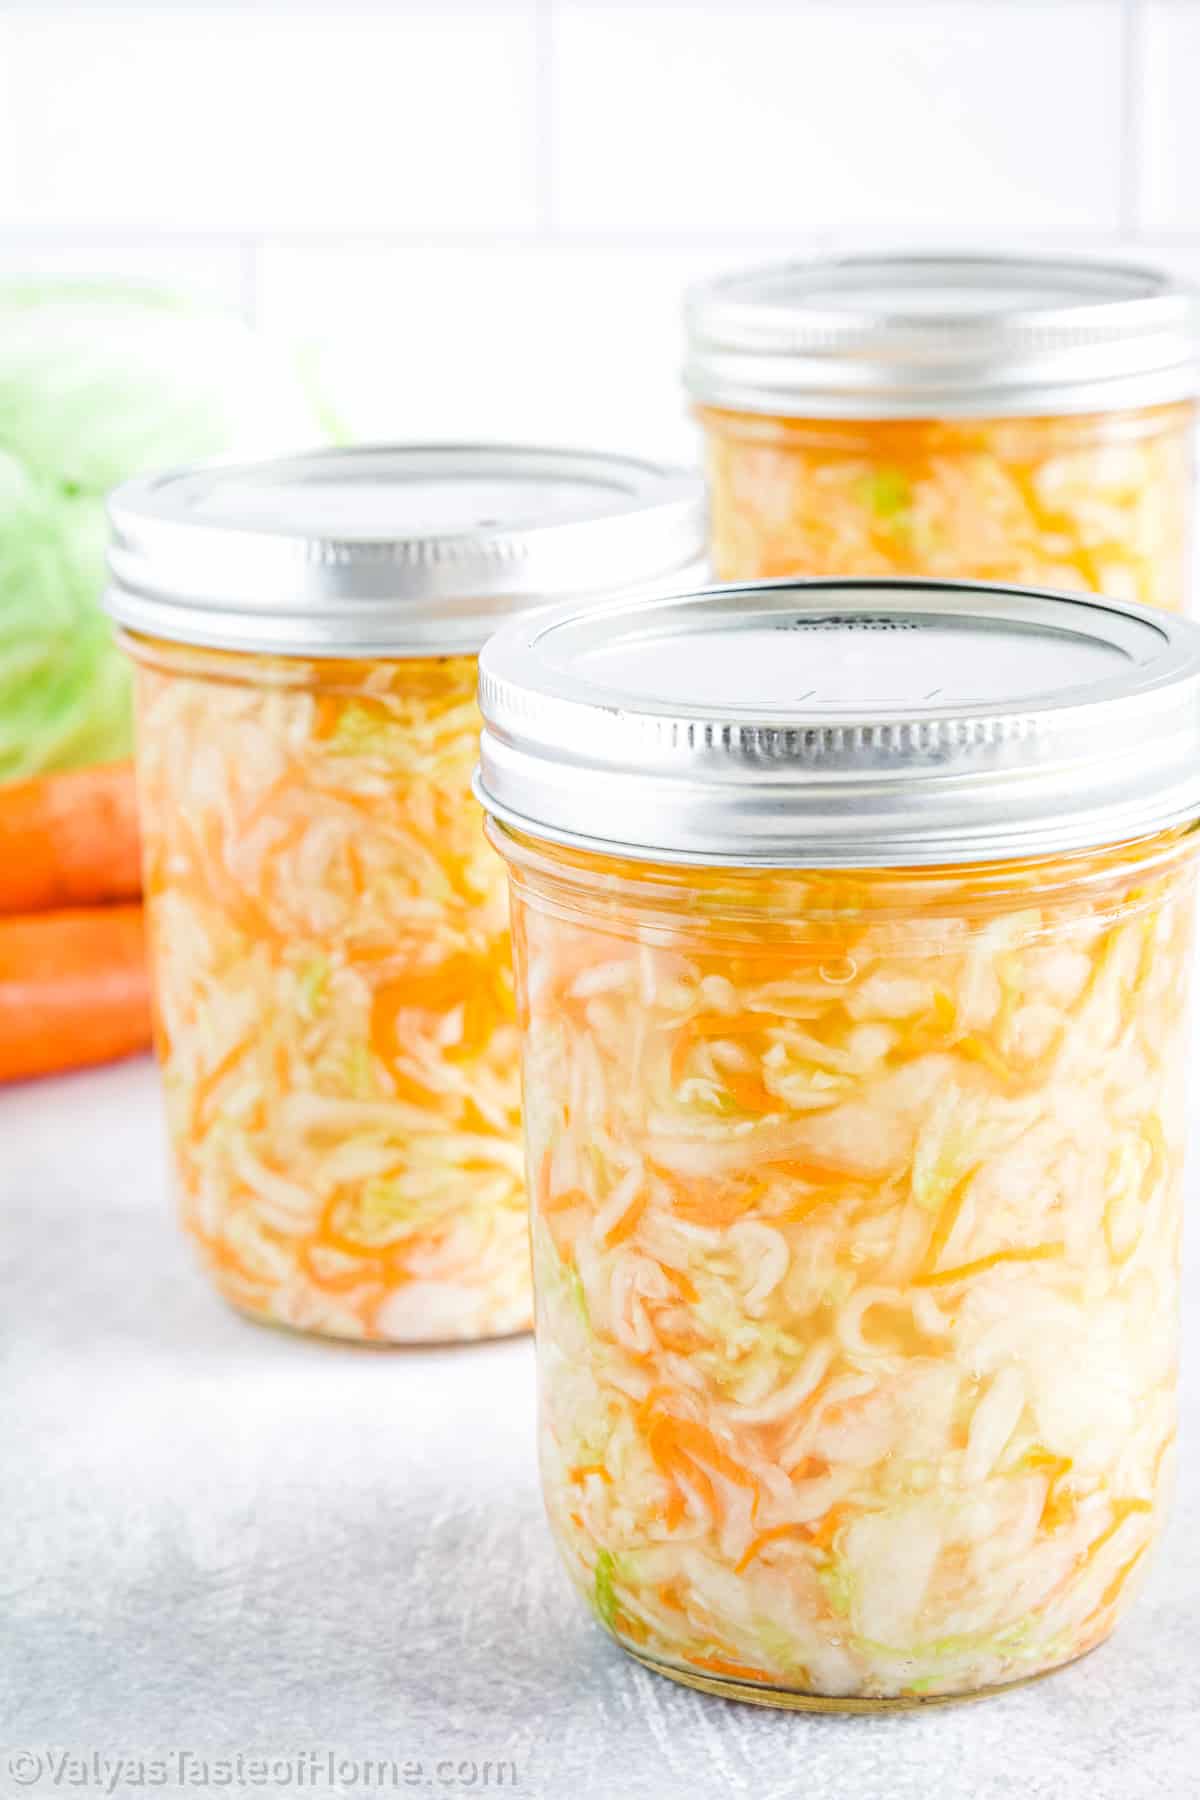 Learn how to make the most delicious Sauerkraut ever with this simple recipe! This homemade sauerkraut recipe is packed with flavor and is incredibly easy to make.